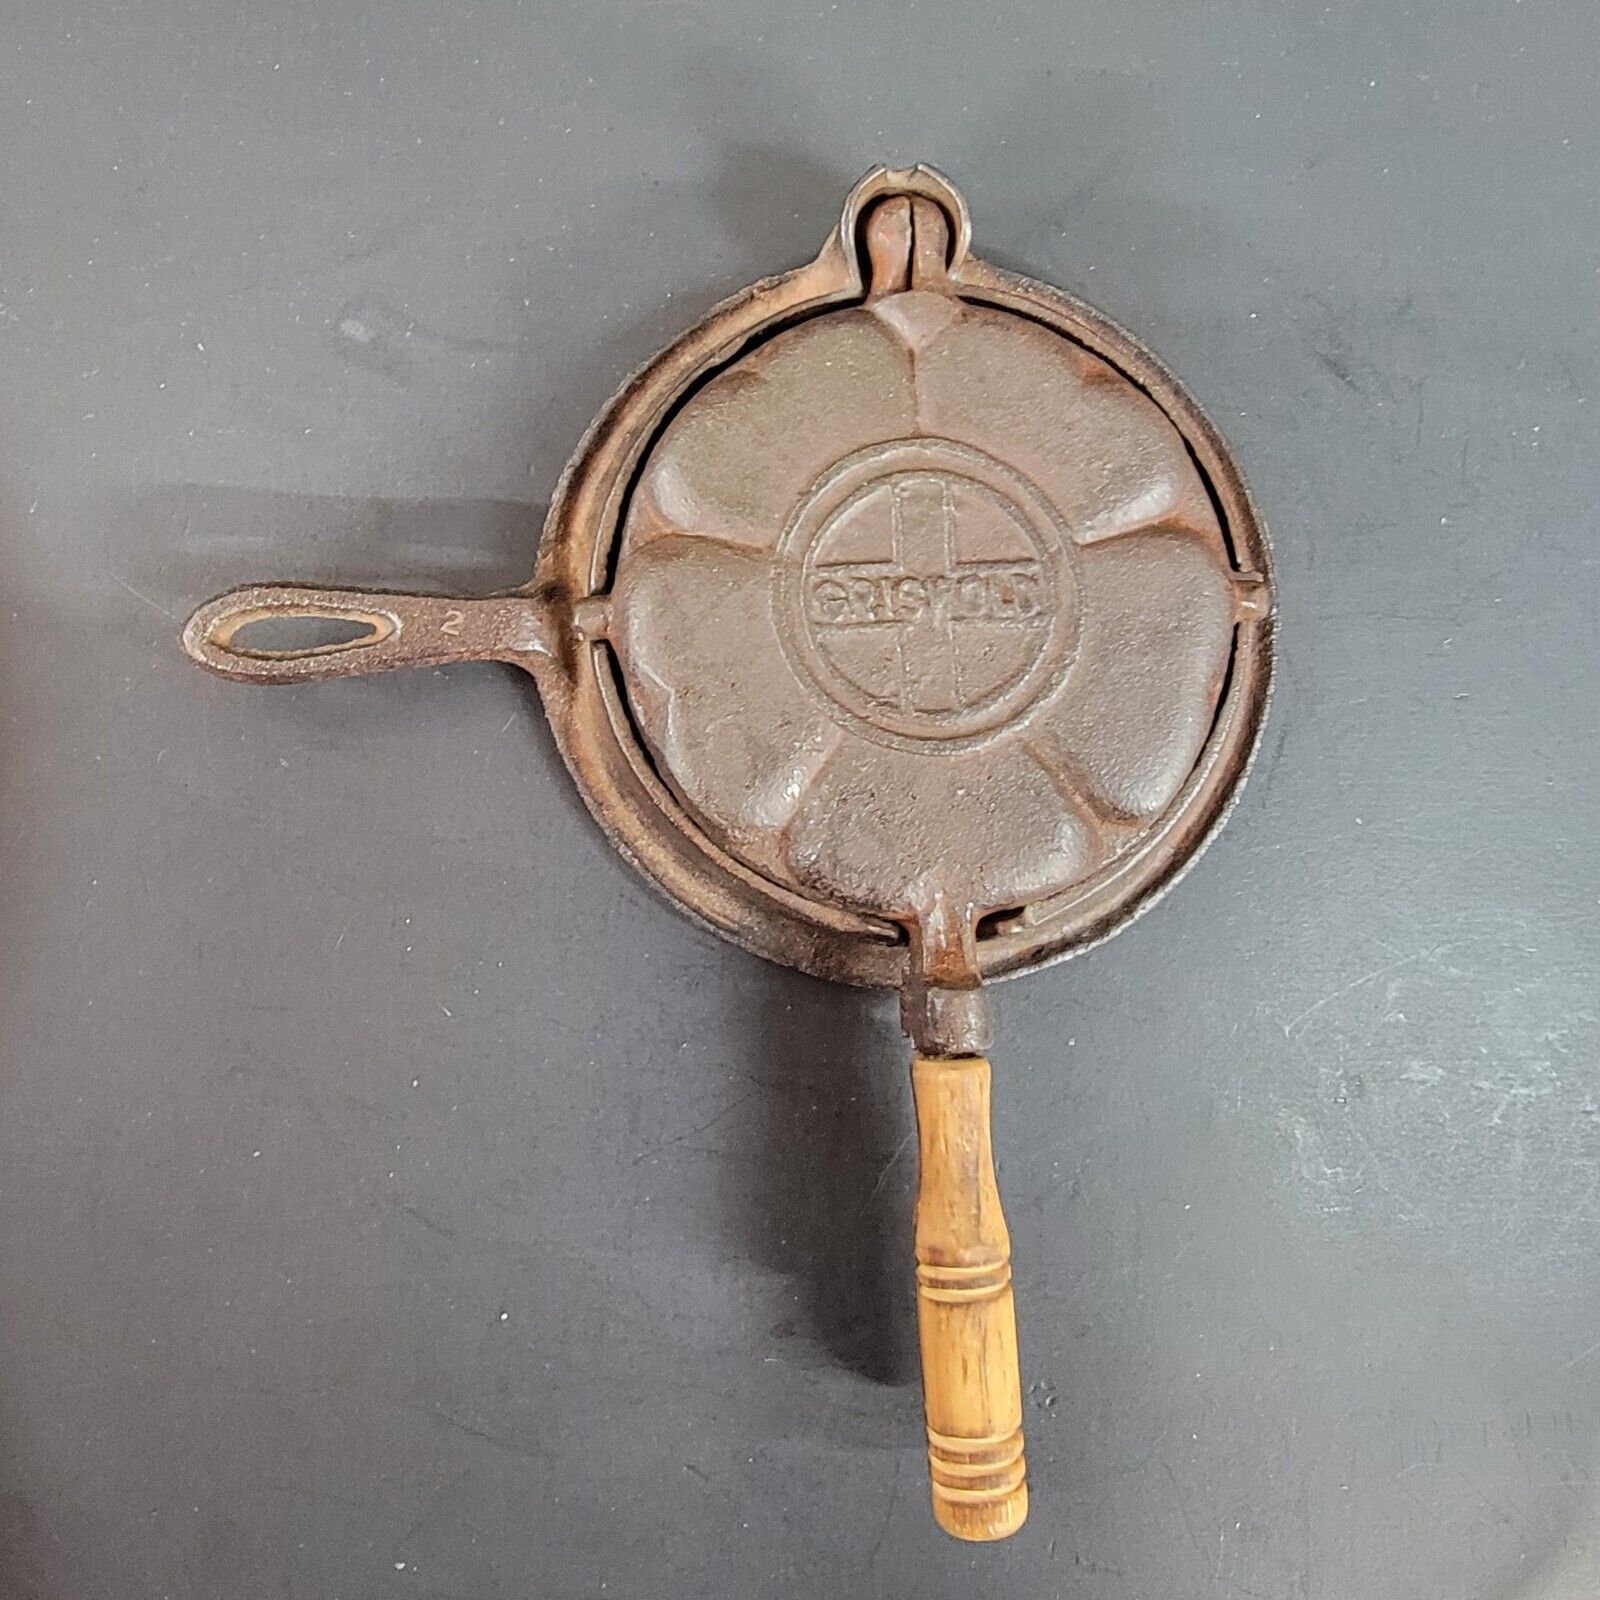 Extremely Rare Griswold Heart Star Child’s Waffle Iron ~ Real Salesman’s Sample